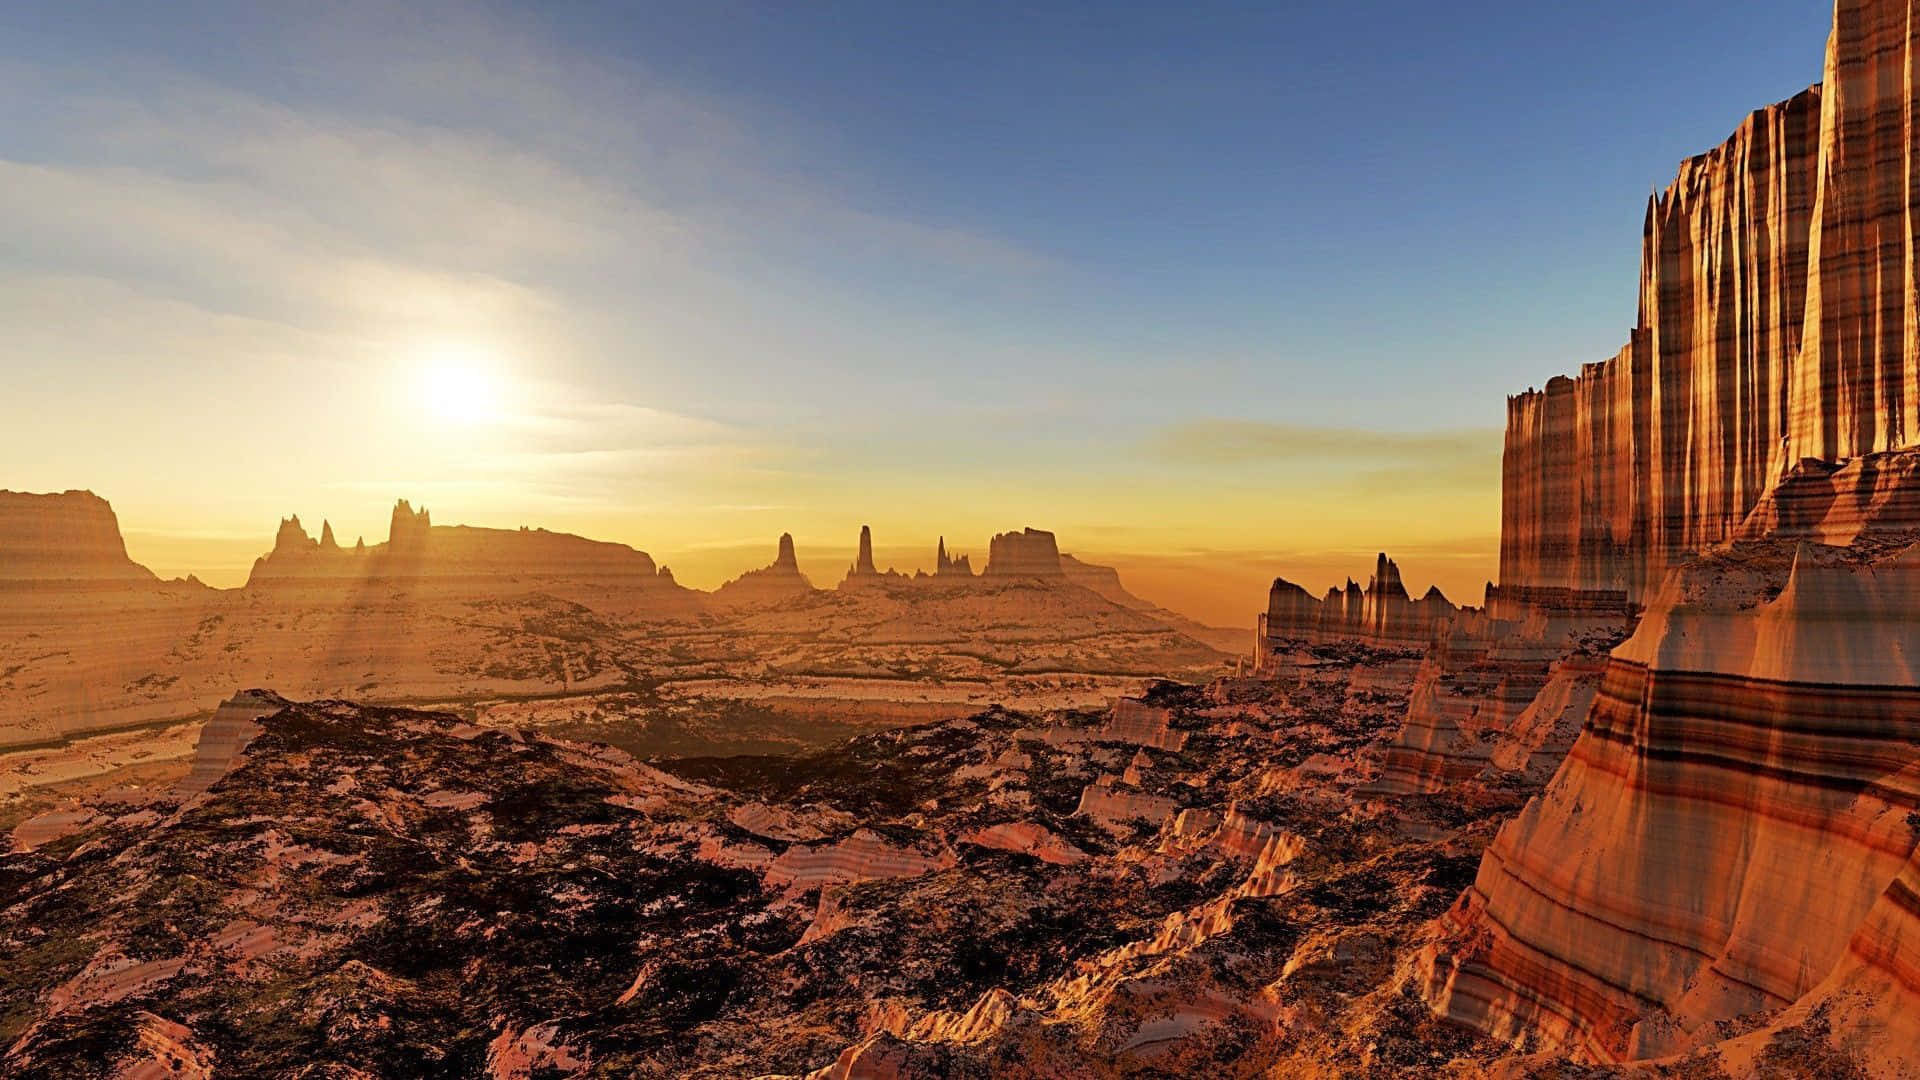 A Desert Landscape With A Sun Rising Over The Rocks